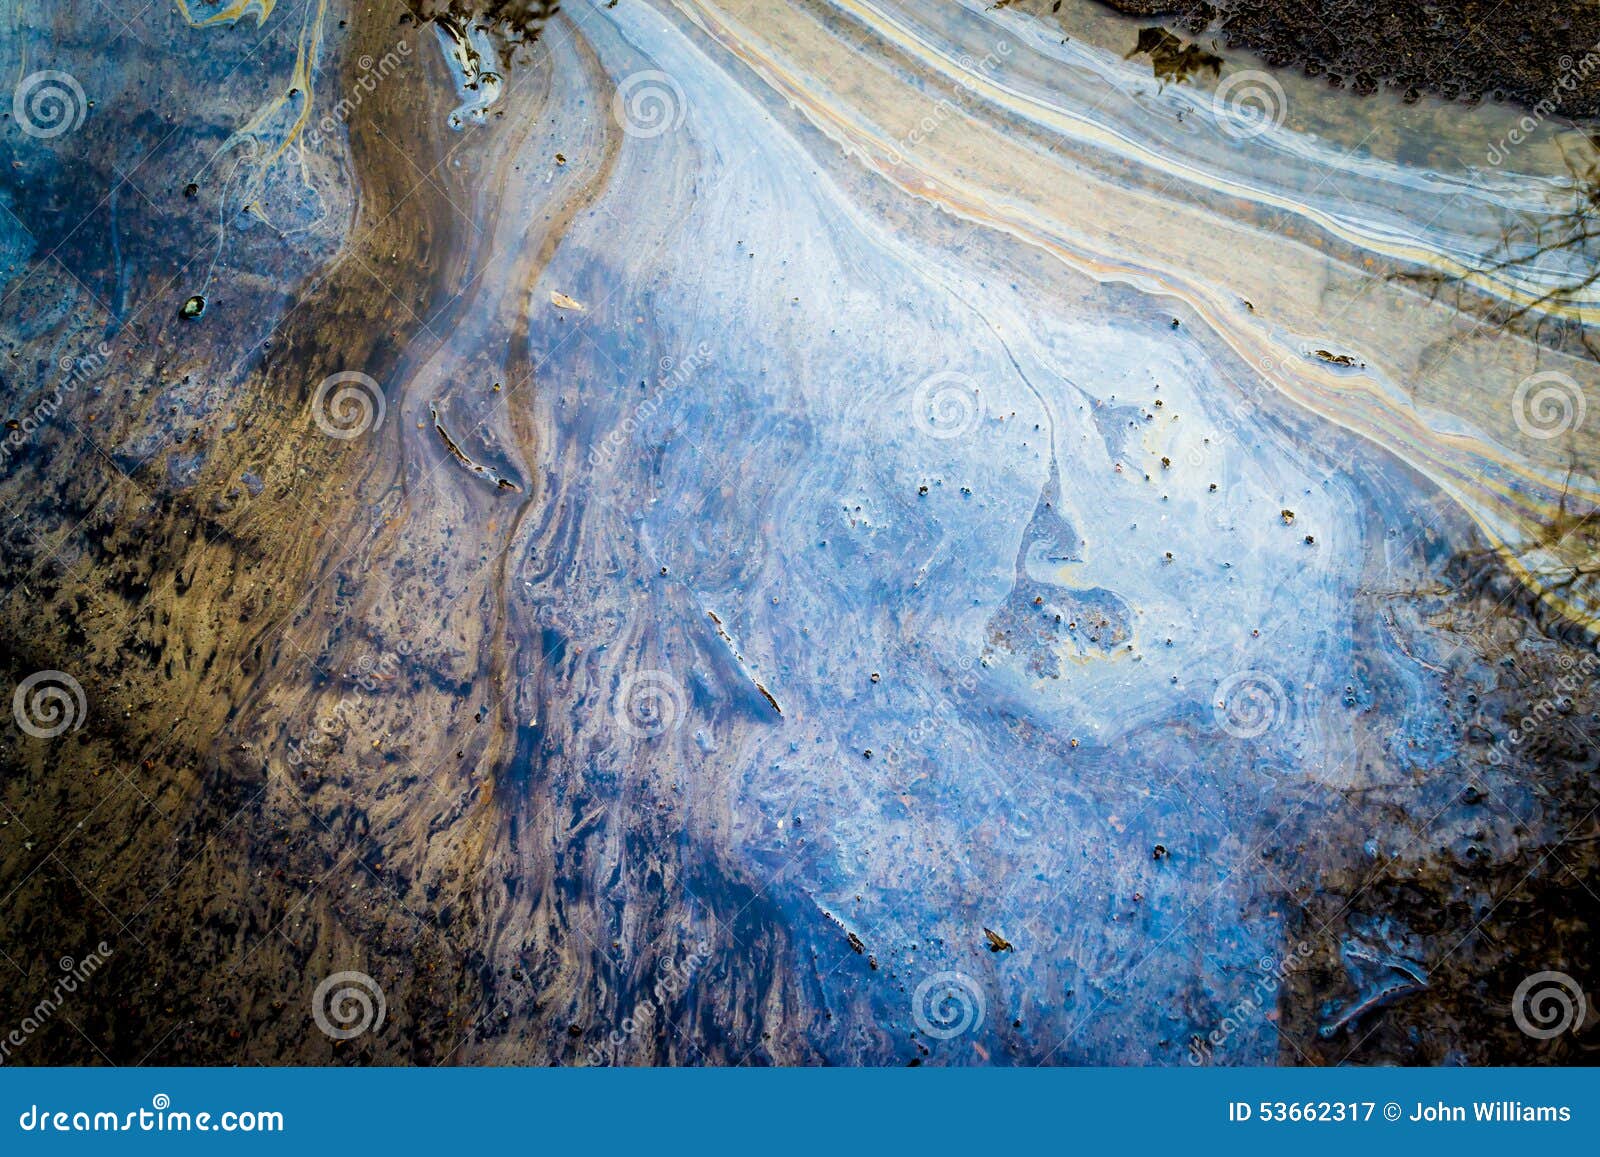 Liquid Oil On Water With Marble Wash Effects Stock Image Image of toxins, stains 53662317